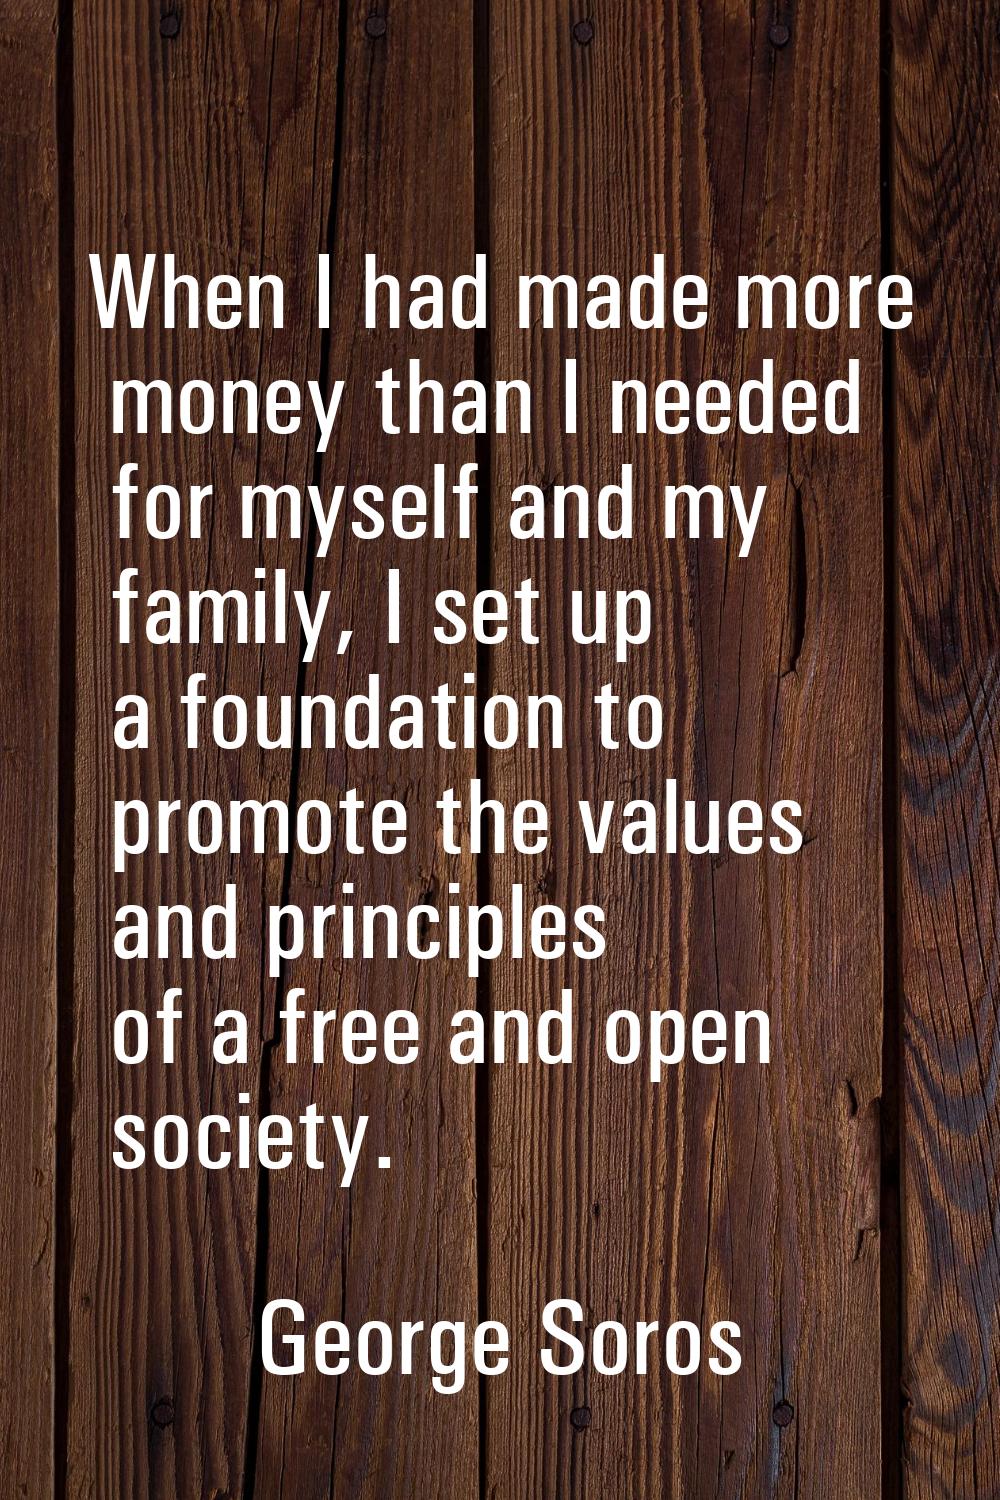 When I had made more money than I needed for myself and my family, I set up a foundation to promote